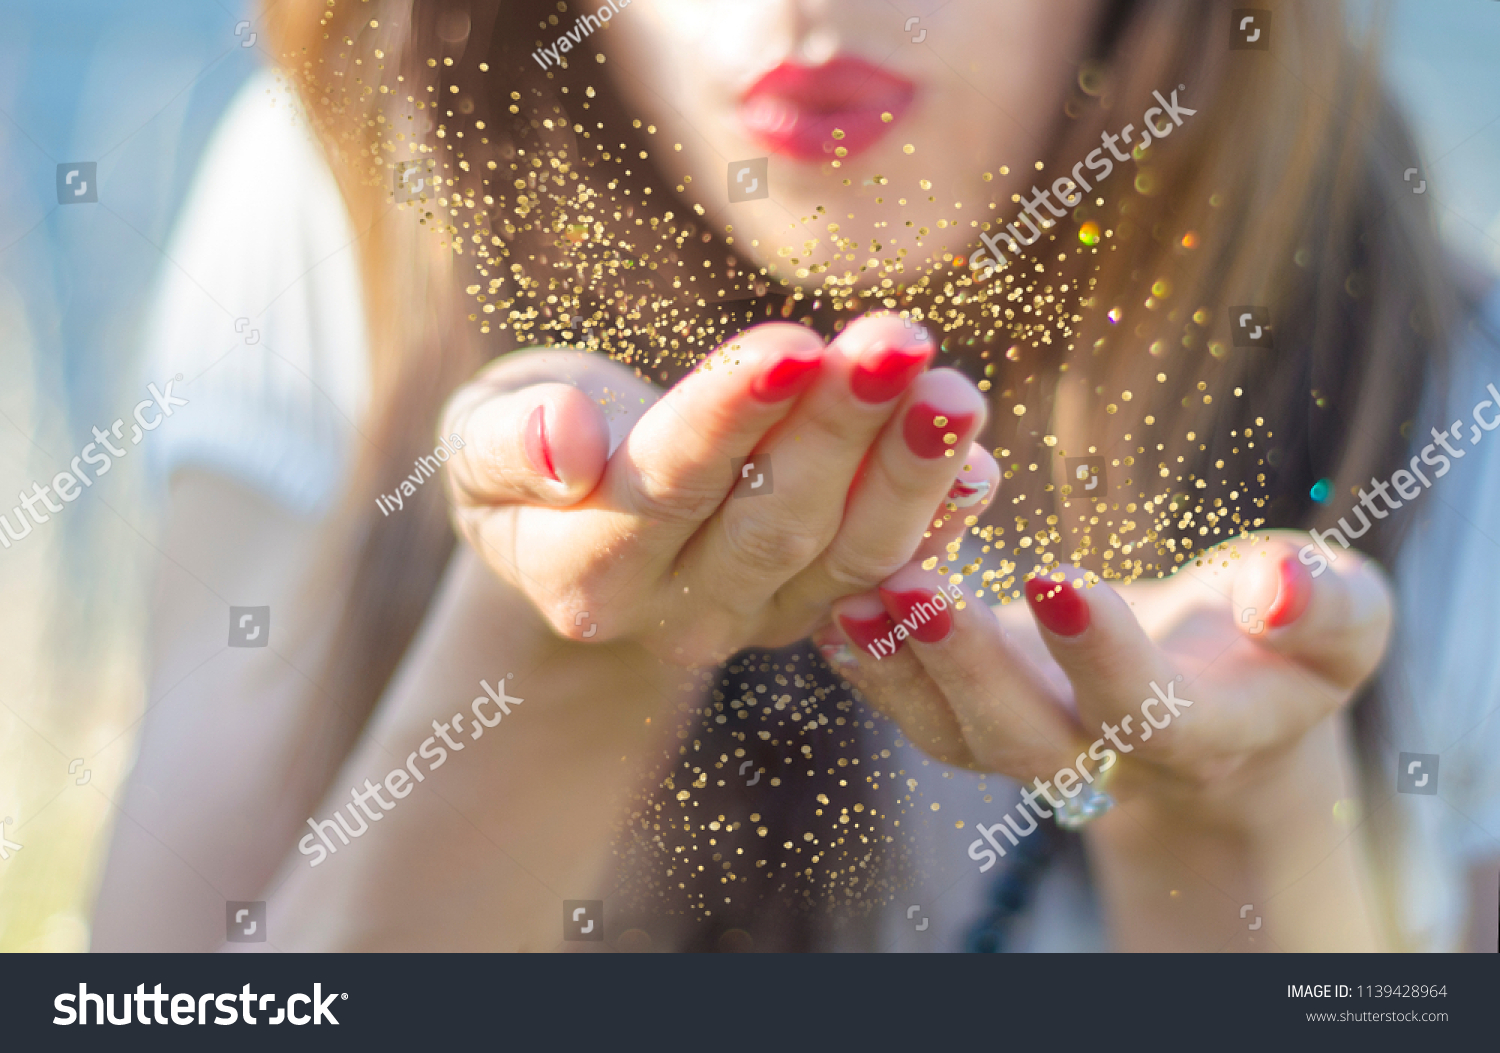 Beauty young woman blowing magic gold glitter dust from her hand. #1139428964